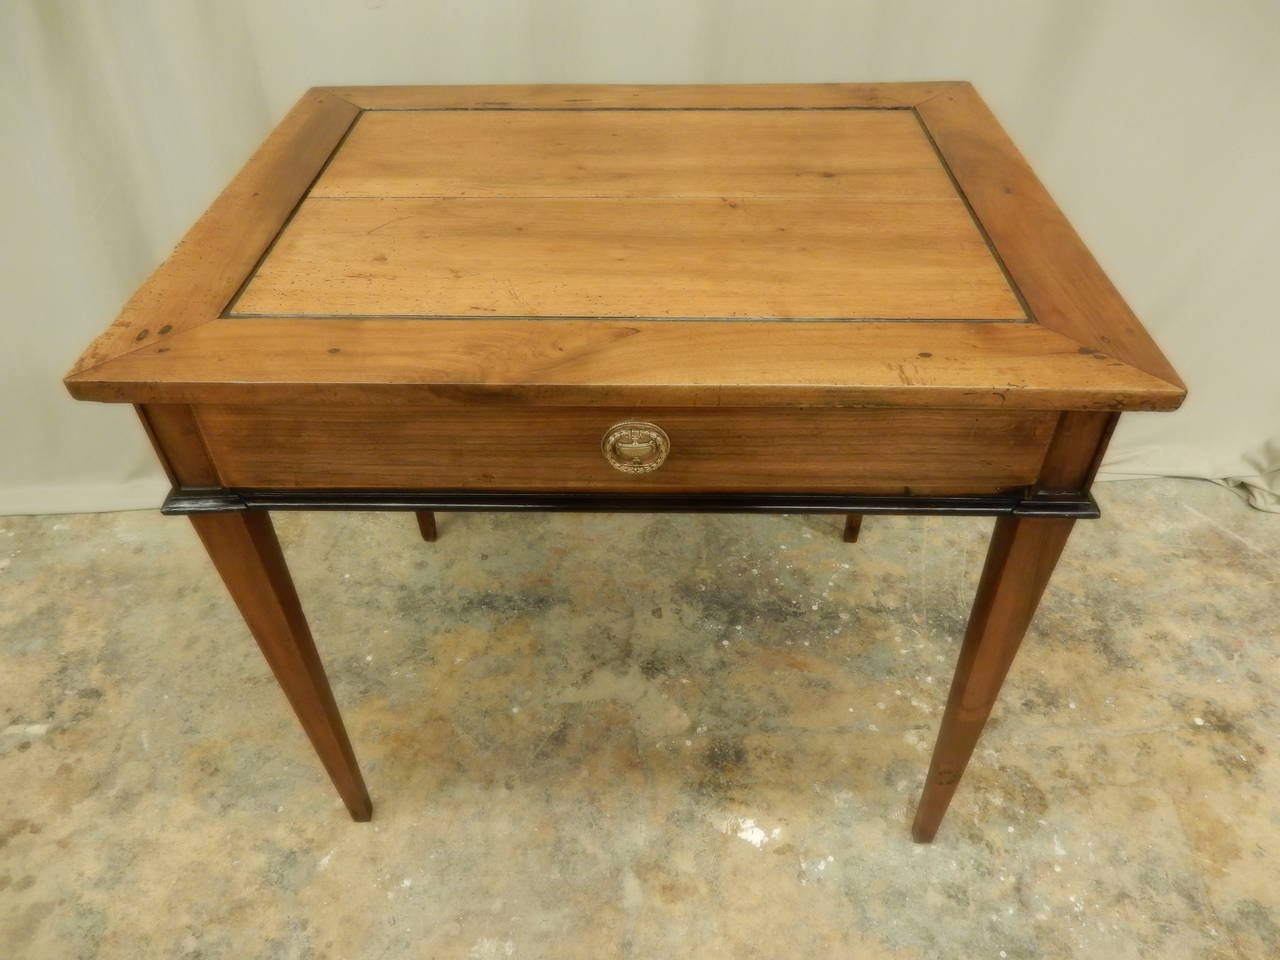 Beautifully restored French Louis XVI walnut side table.  Table is finished on all four sides, has one drawer. It has a warm patina.